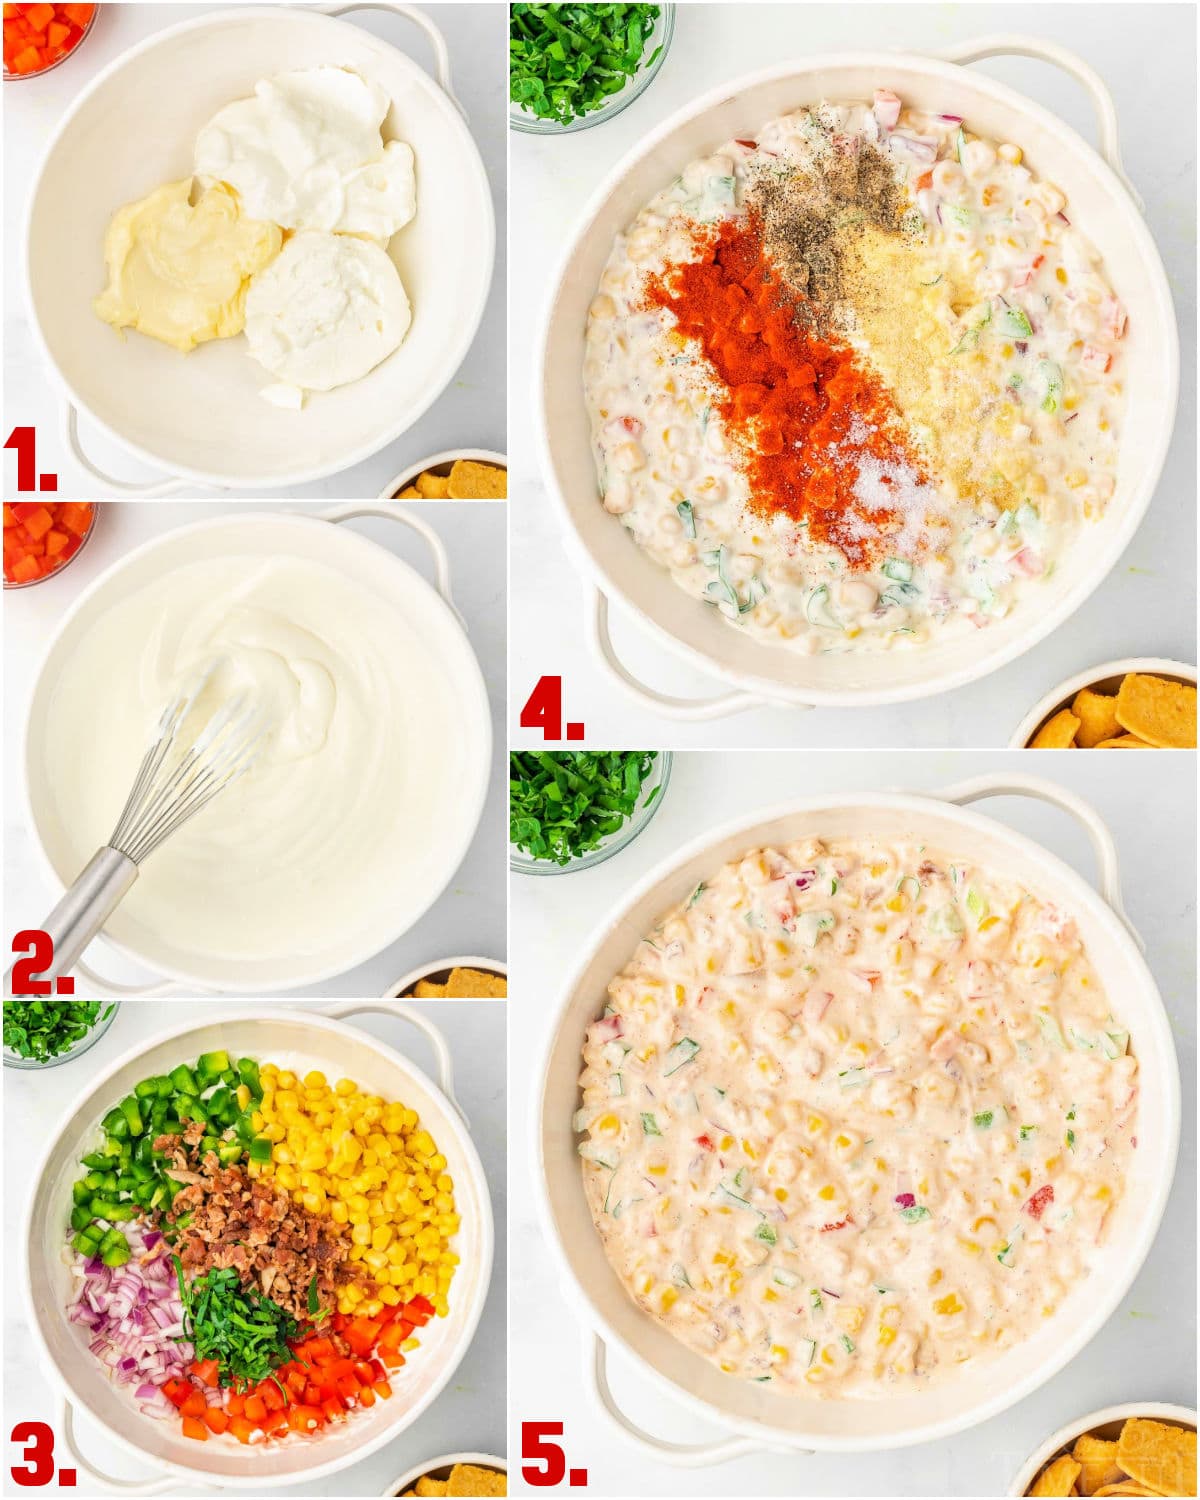 five image collage showing how to make corn dip step by step.